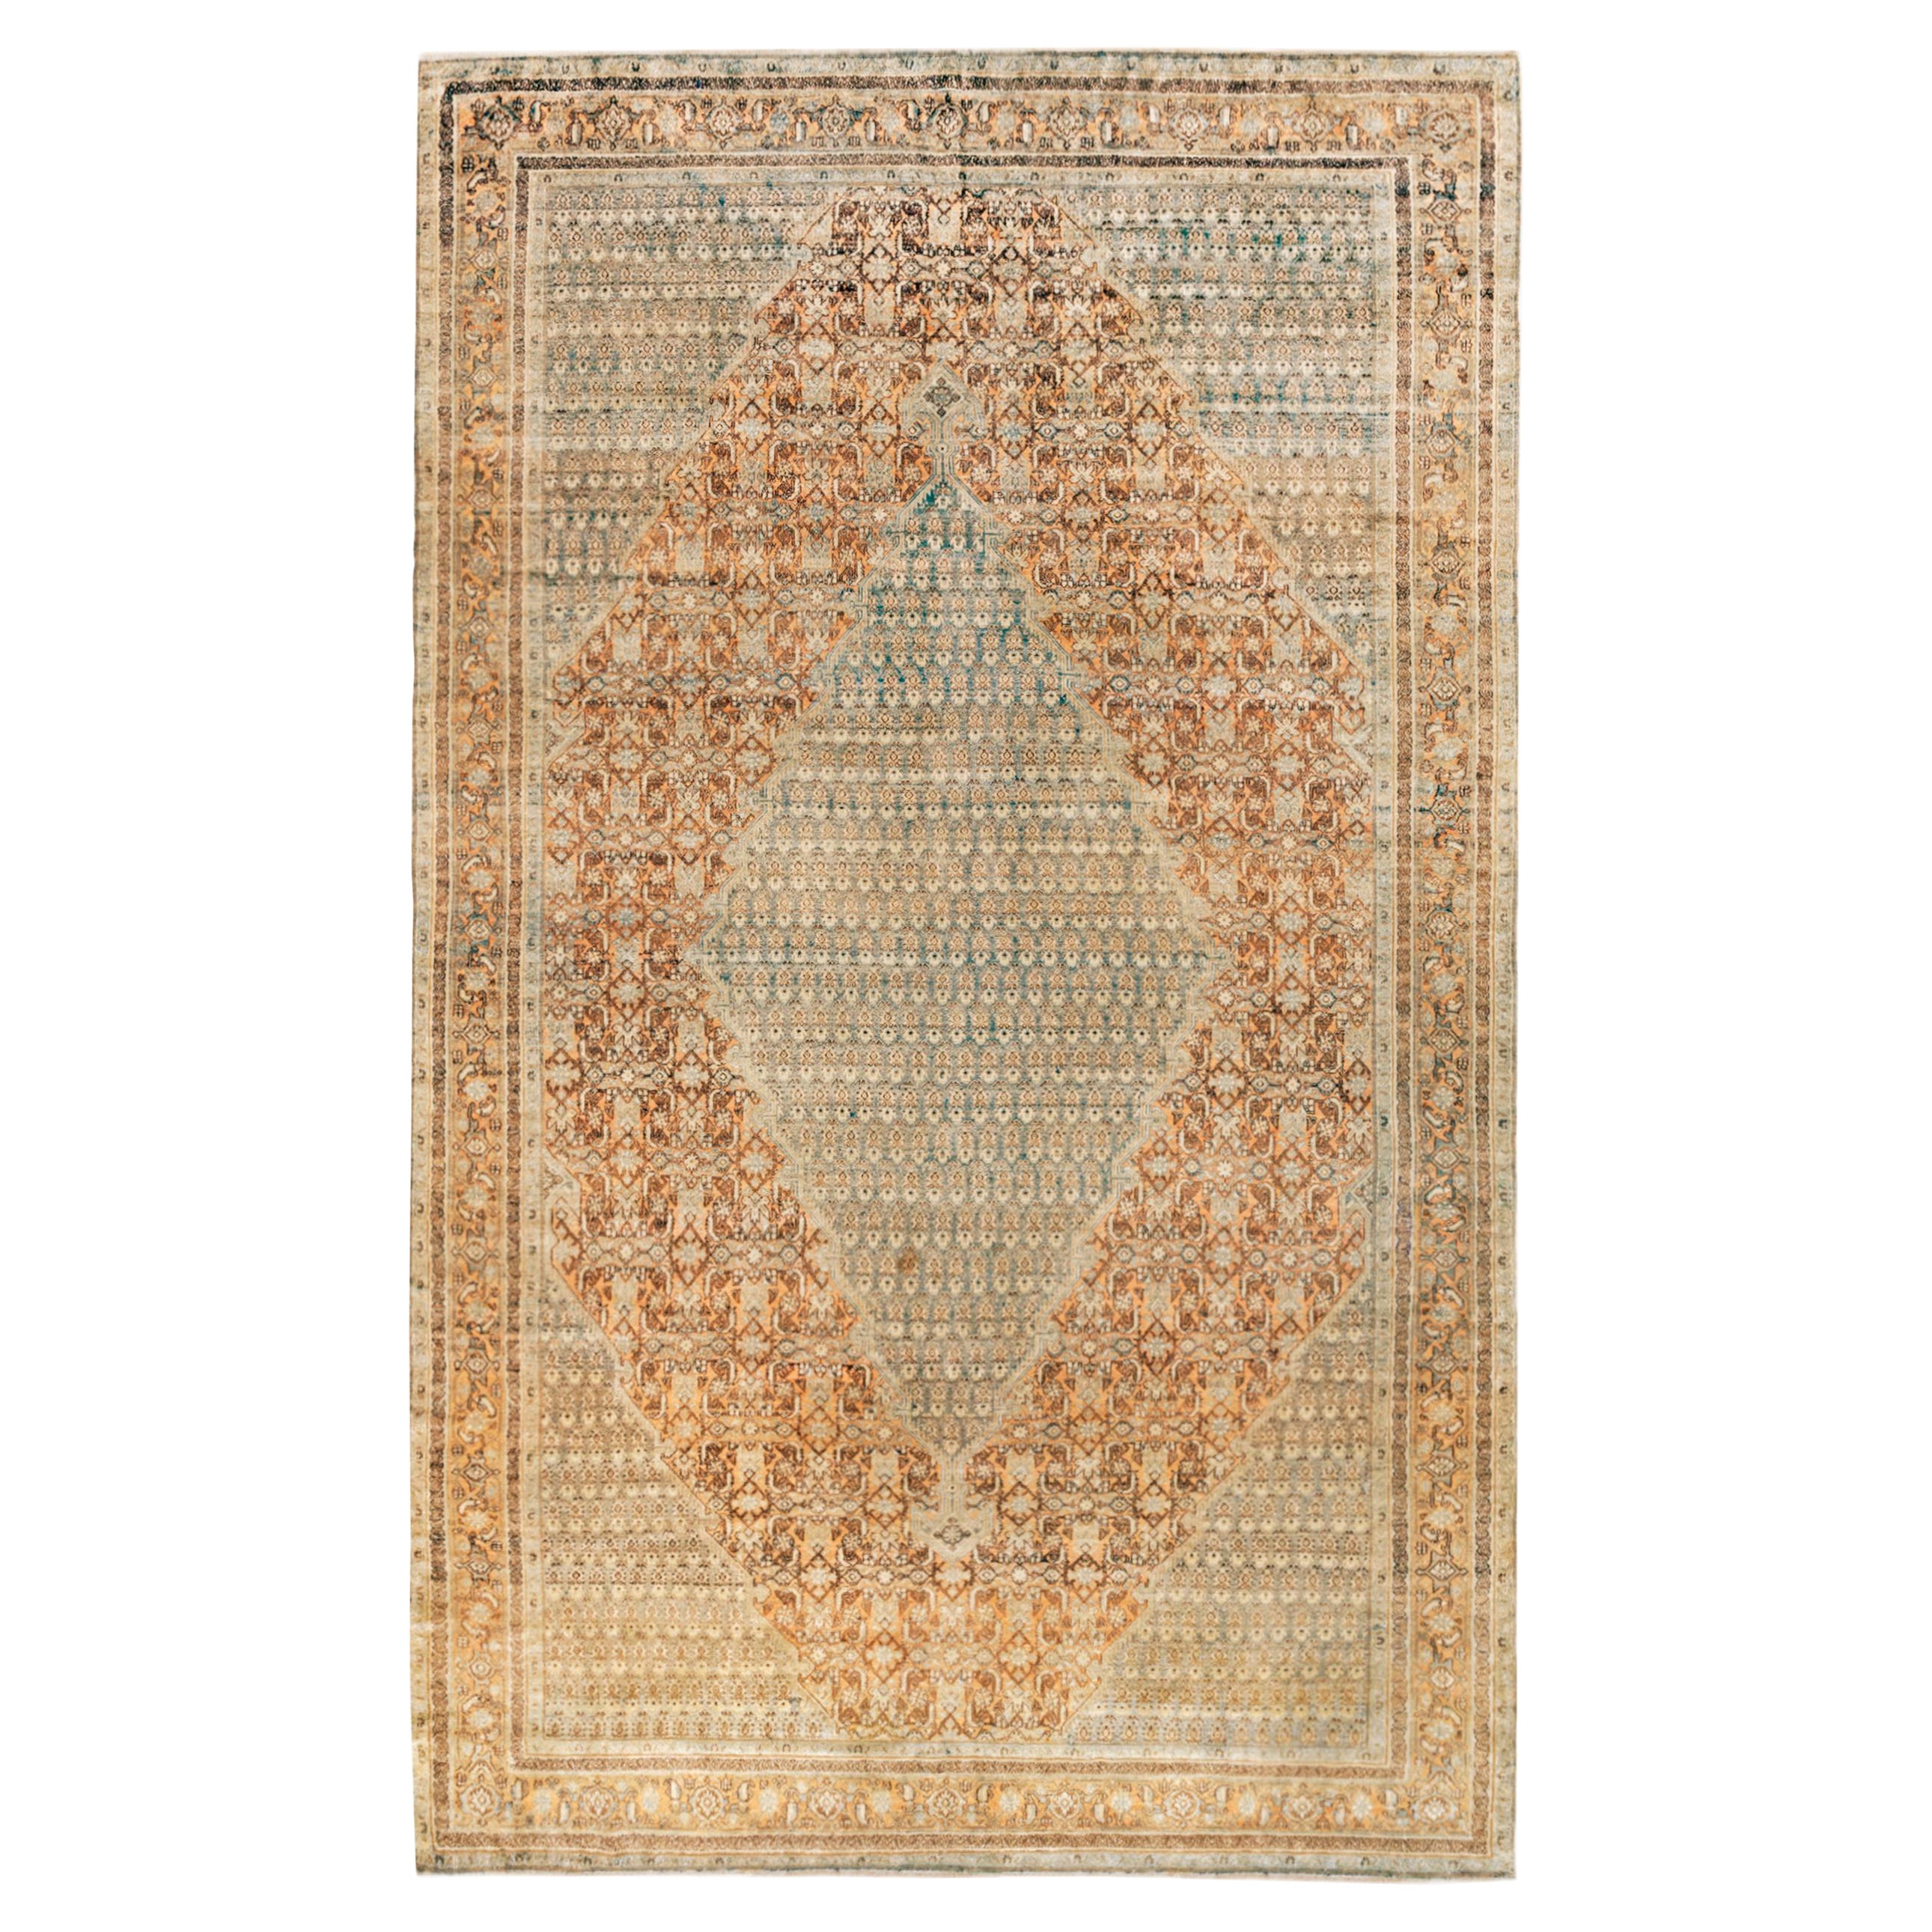 Antique Persian Bibikabad Oriental Rug, in Gallery size, with Central Medallion For Sale